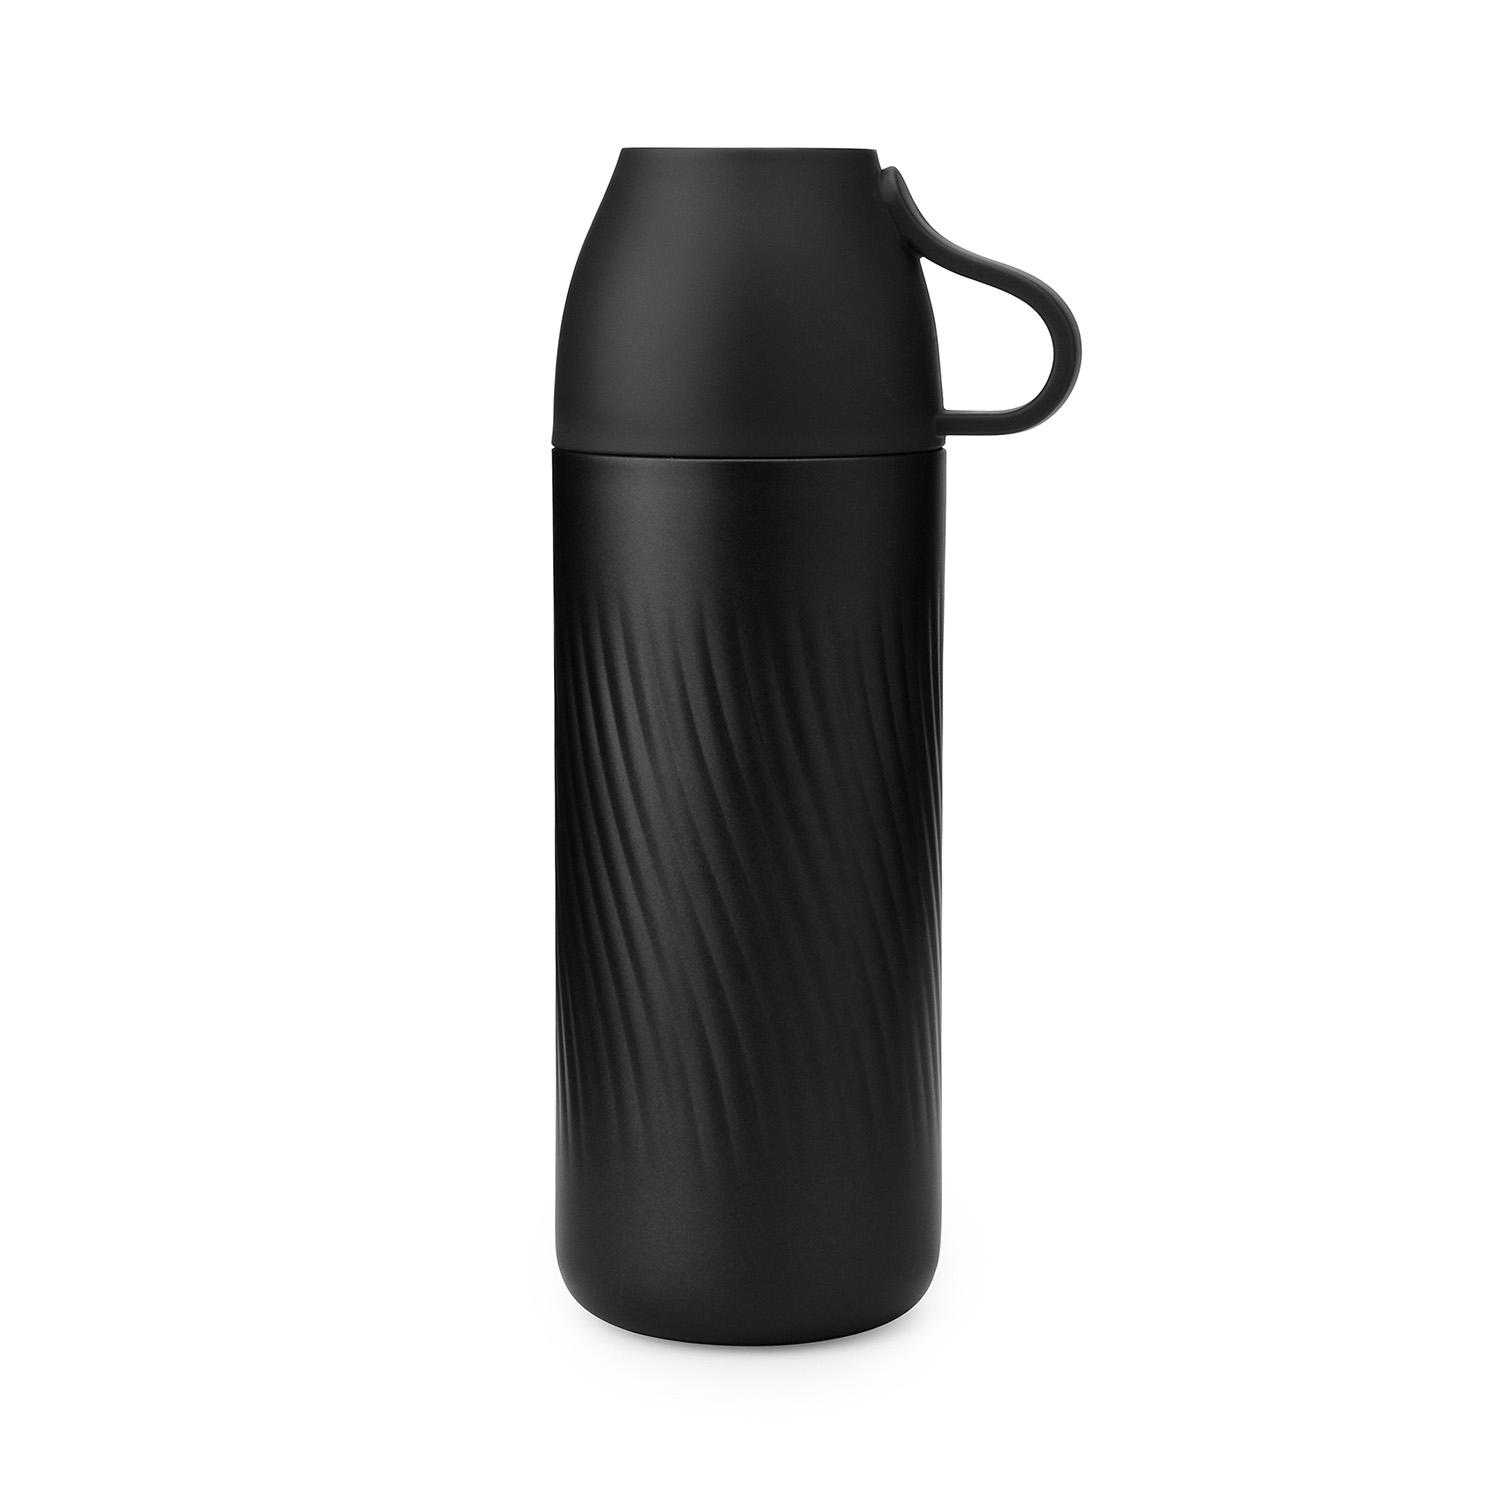 https://www.waterbottle.tech/wp-content/uploads/2019/11/vacuum-insulated-compact-stainless-steel-beverage-bottle-with-built-in-storage-cup-cap-s12380f1-1.jpg